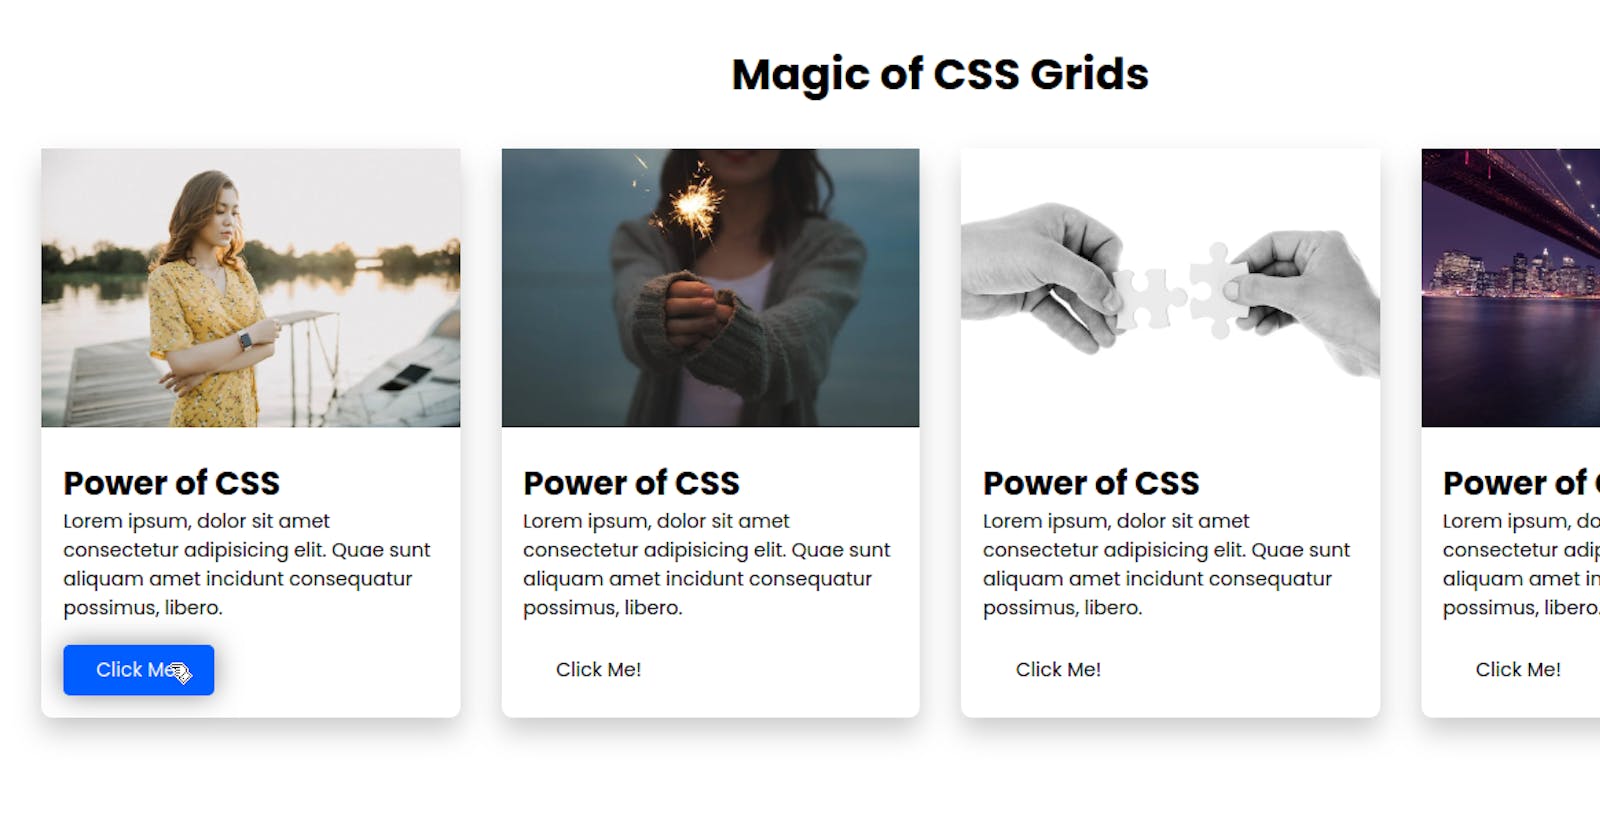 Let's do some magic with CSS grids.